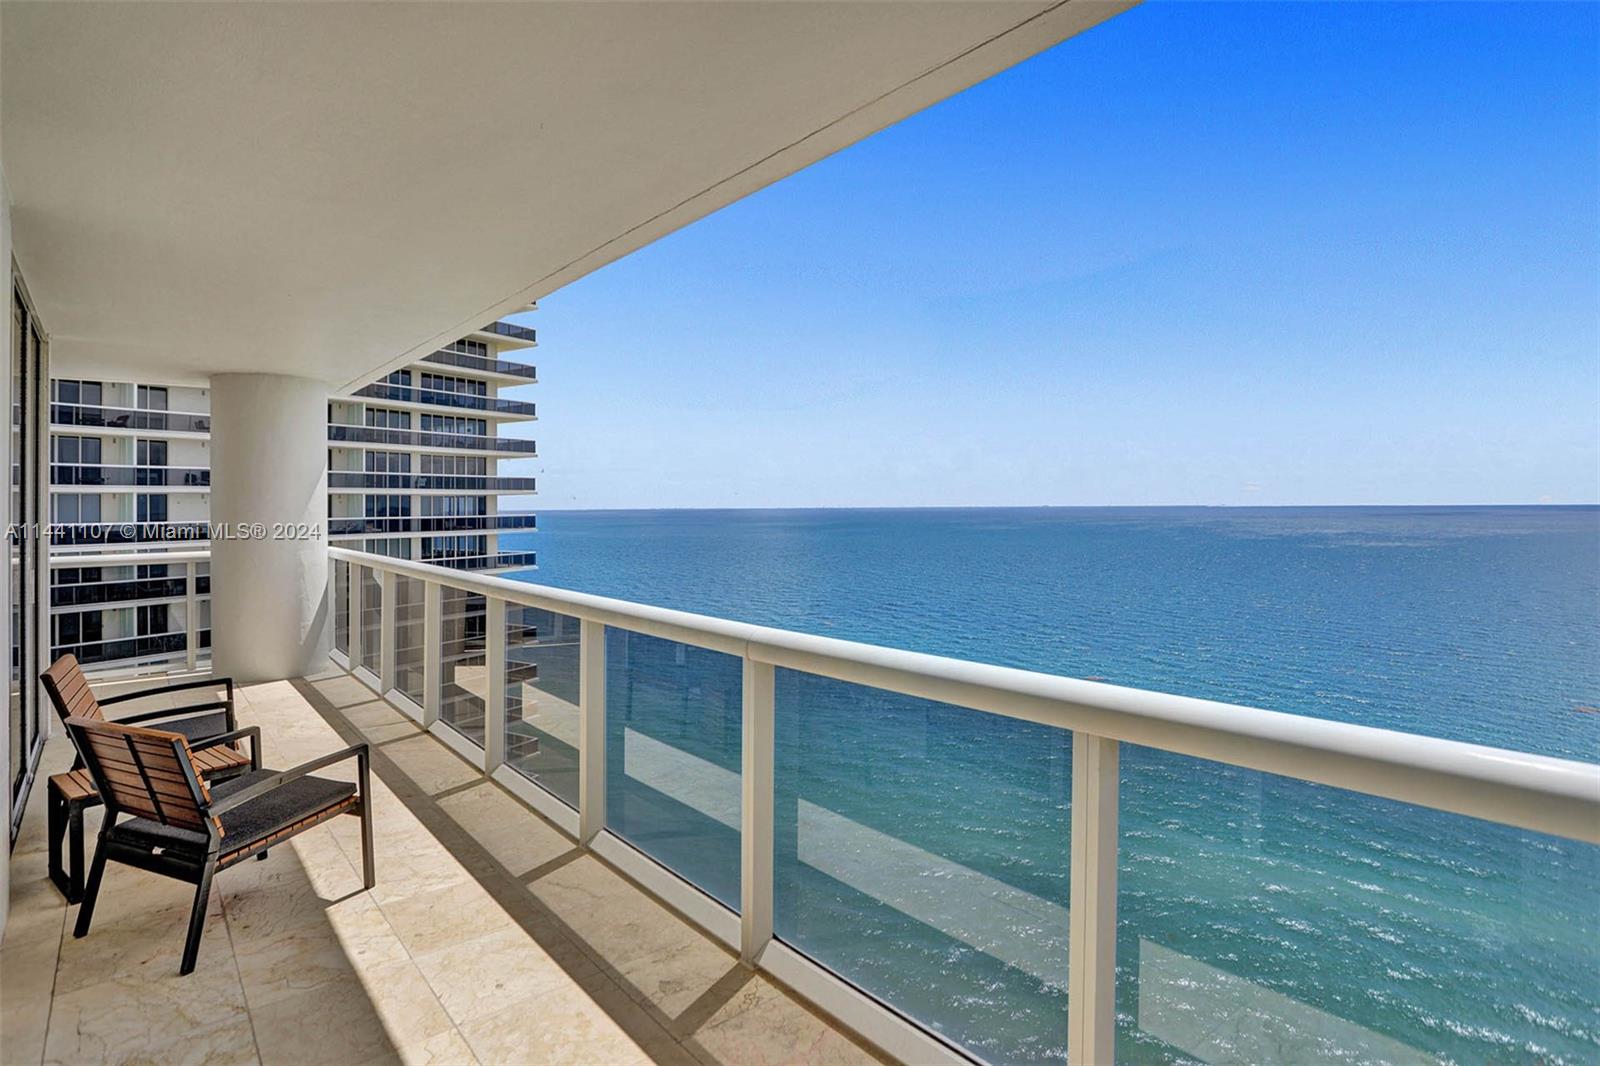 From the moment you walk in you will experience incredible breathtaking views of the ocean! This spacious residence features 3 bedrooms, 3.5 bathrooms with 2,078 interior SF and direct oceanfront views from every room, through the floor-to-ceiling glass sliding doors. Enjoy the magnificent 586 Sq.Ft. wrap-around balcony all year long. Other features include marble floors throughout, an open concept European-style kitchen with granite countertops, Kitchen Aid appliances and lots of storage cabinets. Live at the highly desirable Beach Club Tower 1. This oceanfront condominium features 5-Star resort style amenities, full-time concierge, and security, 24-hour valet, 5 warmed pools, and a 50,000 SF fitness center and spa.